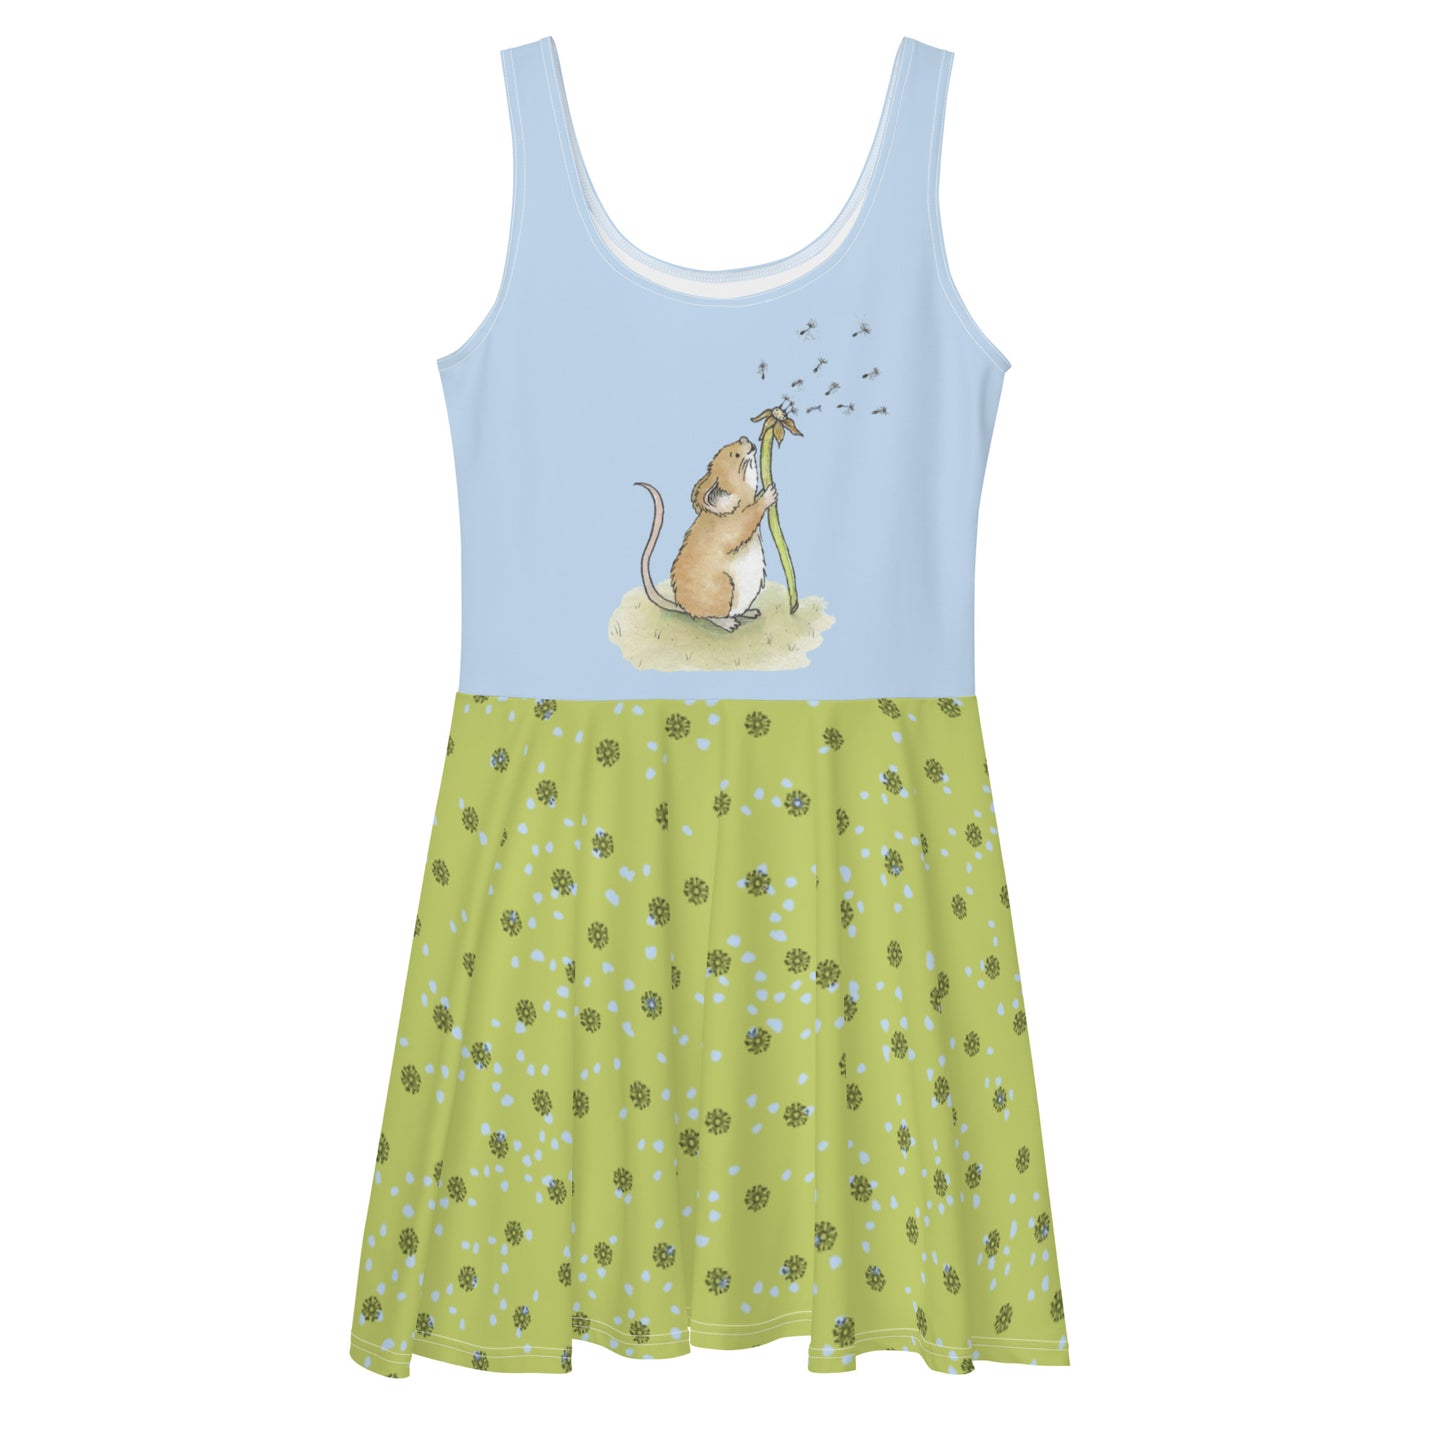 Sleeveless skater dress featuring Dandelion Wish design of a mouse making a wish on a dandelion fluff on a blue top. The mid-thigh length flared green skirt features flowers and dot details. Also has an elastic waistline.